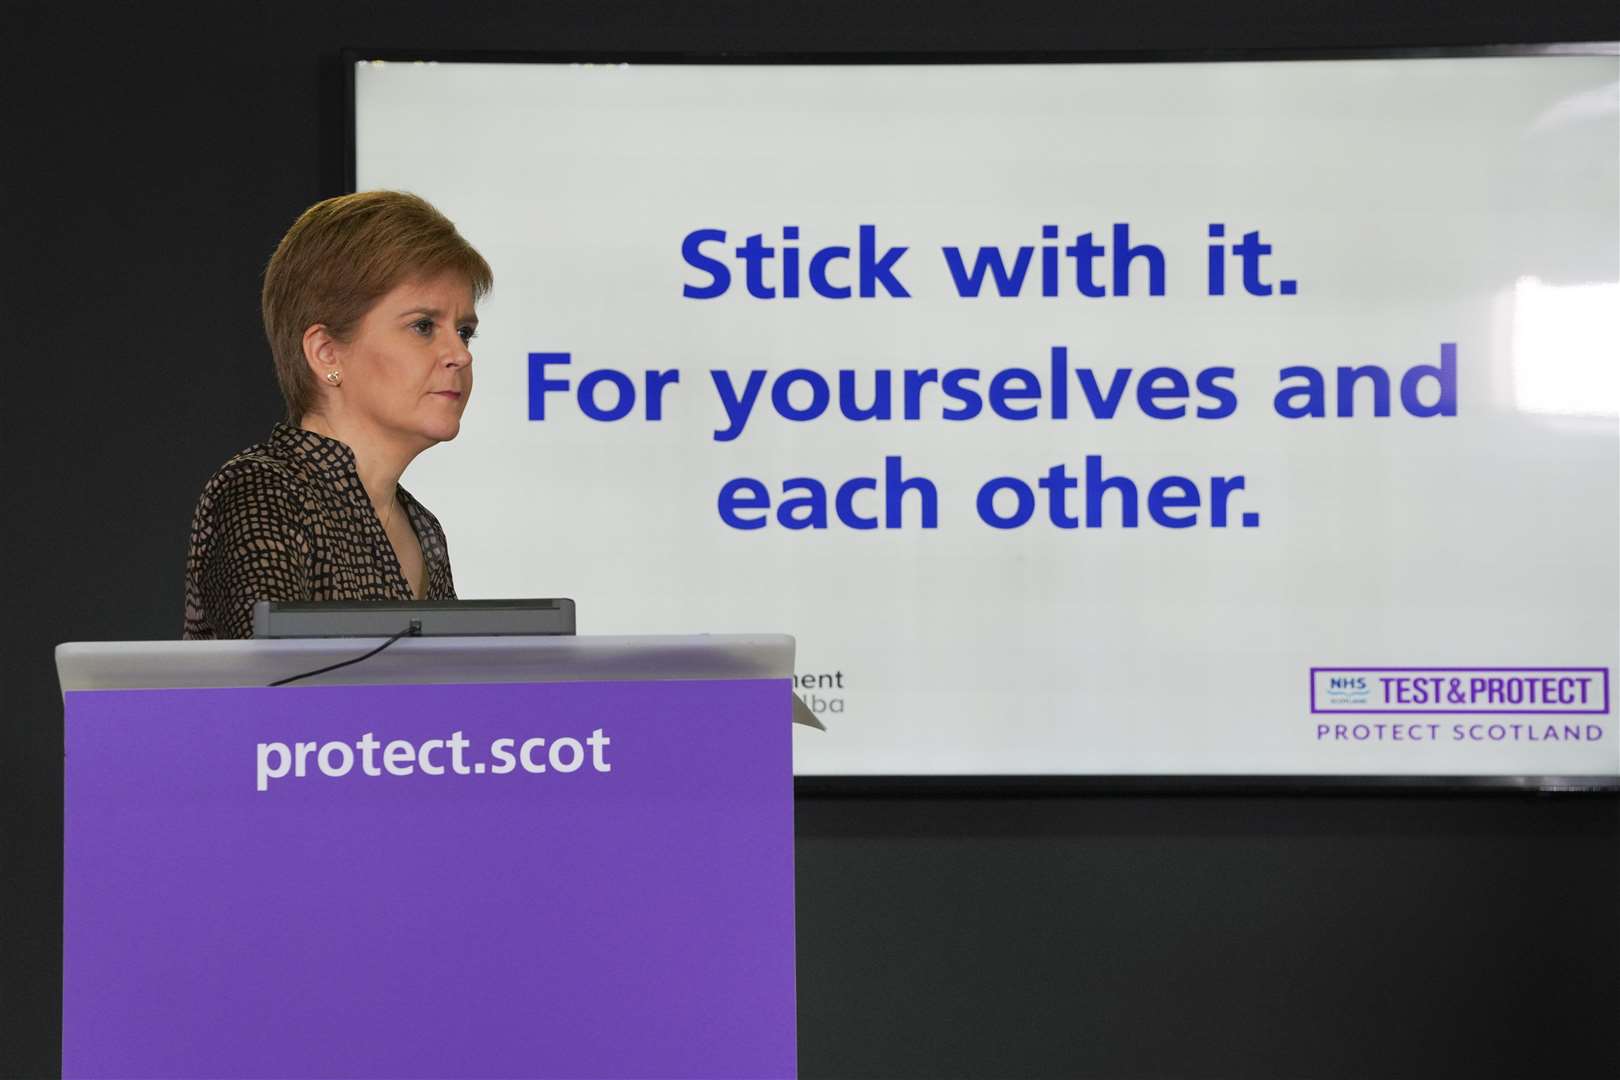 Nicola Sturgeon said this week that action was needed now to prevent a return to the peak level of infections experienced in spring.